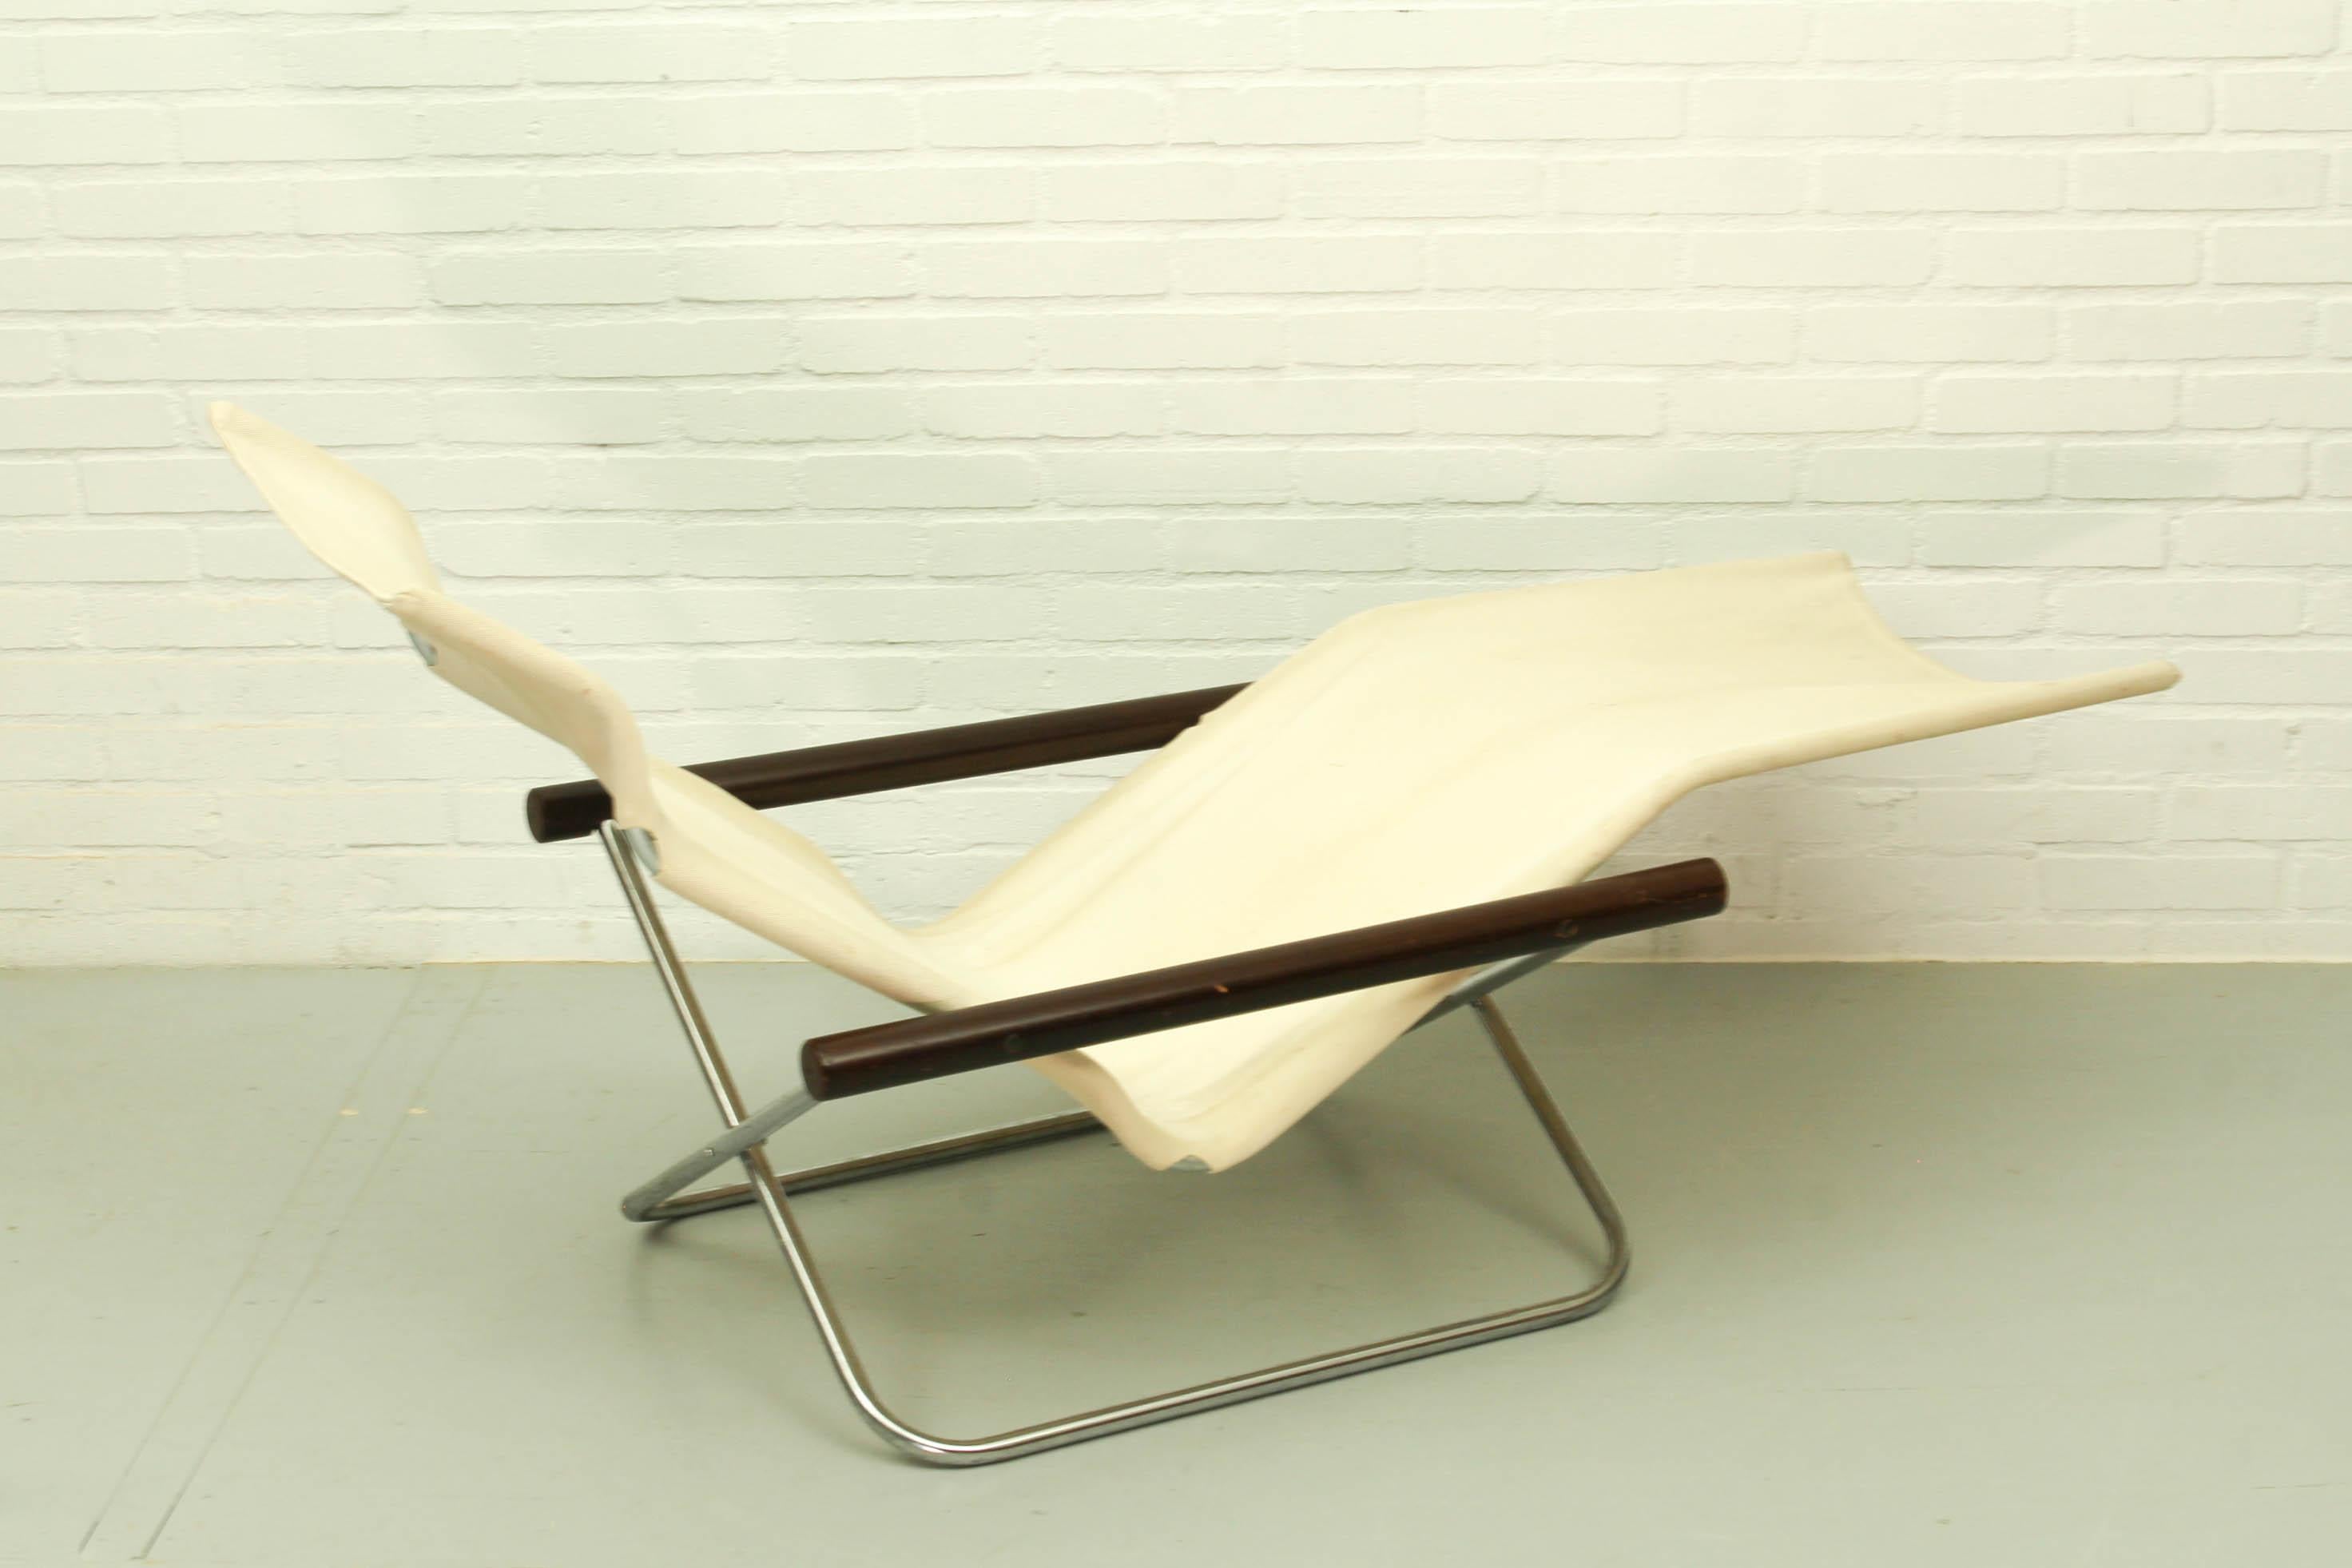 Set of 2 chaise lounges by Takeshi Nii for Jox Intern, Italy, 1960s. This model is called “NY” and is one of the more rare edition of his range of folding chairs. Easy to store or move. This design has been part of the MOMA collection. The off-white